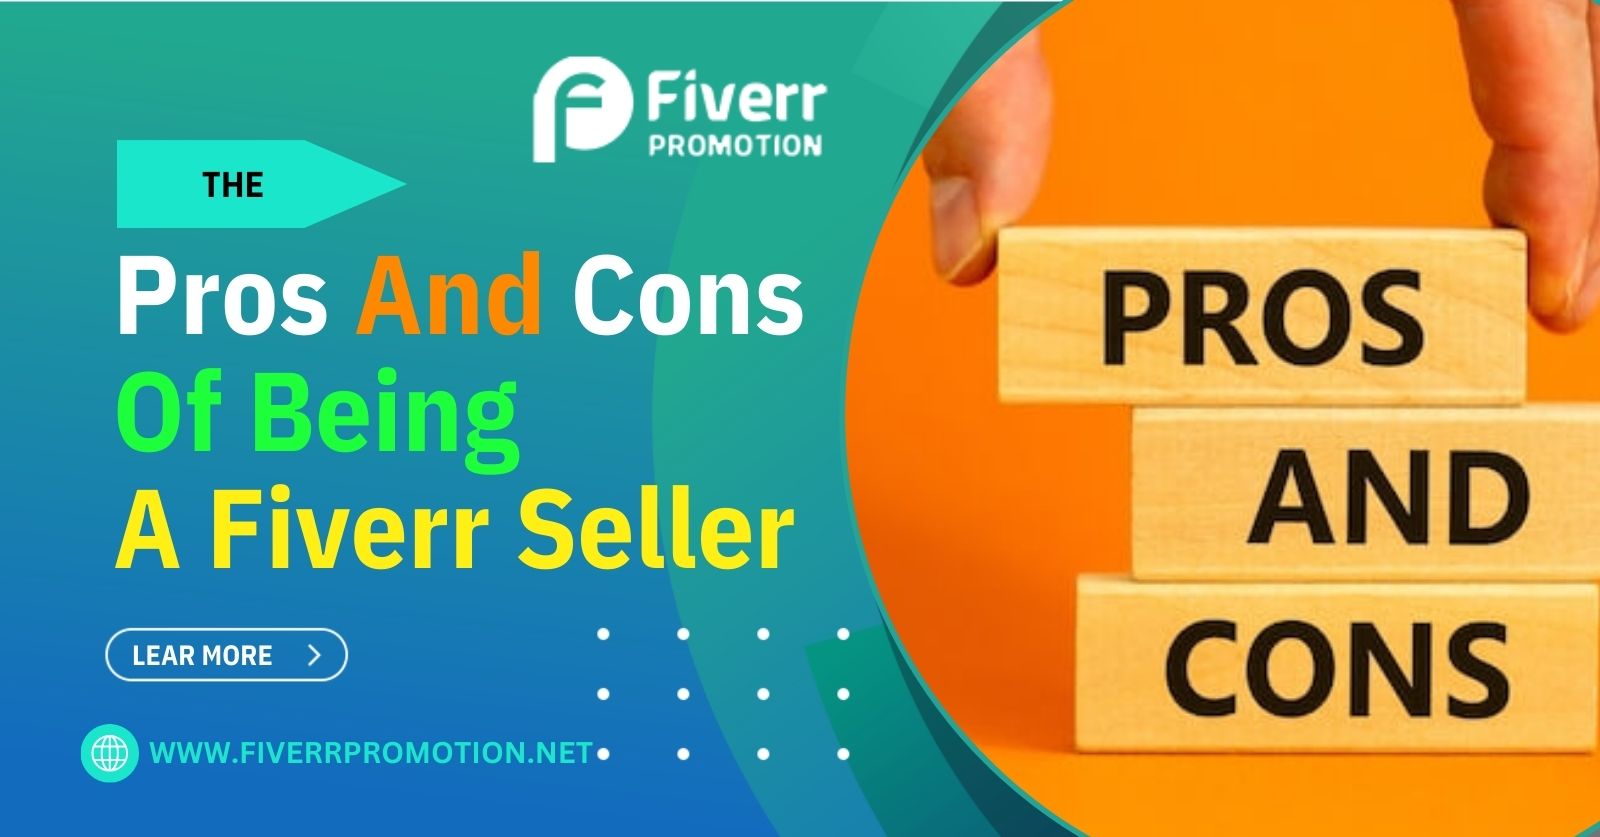 The pros and cons of being a Fiverr seller